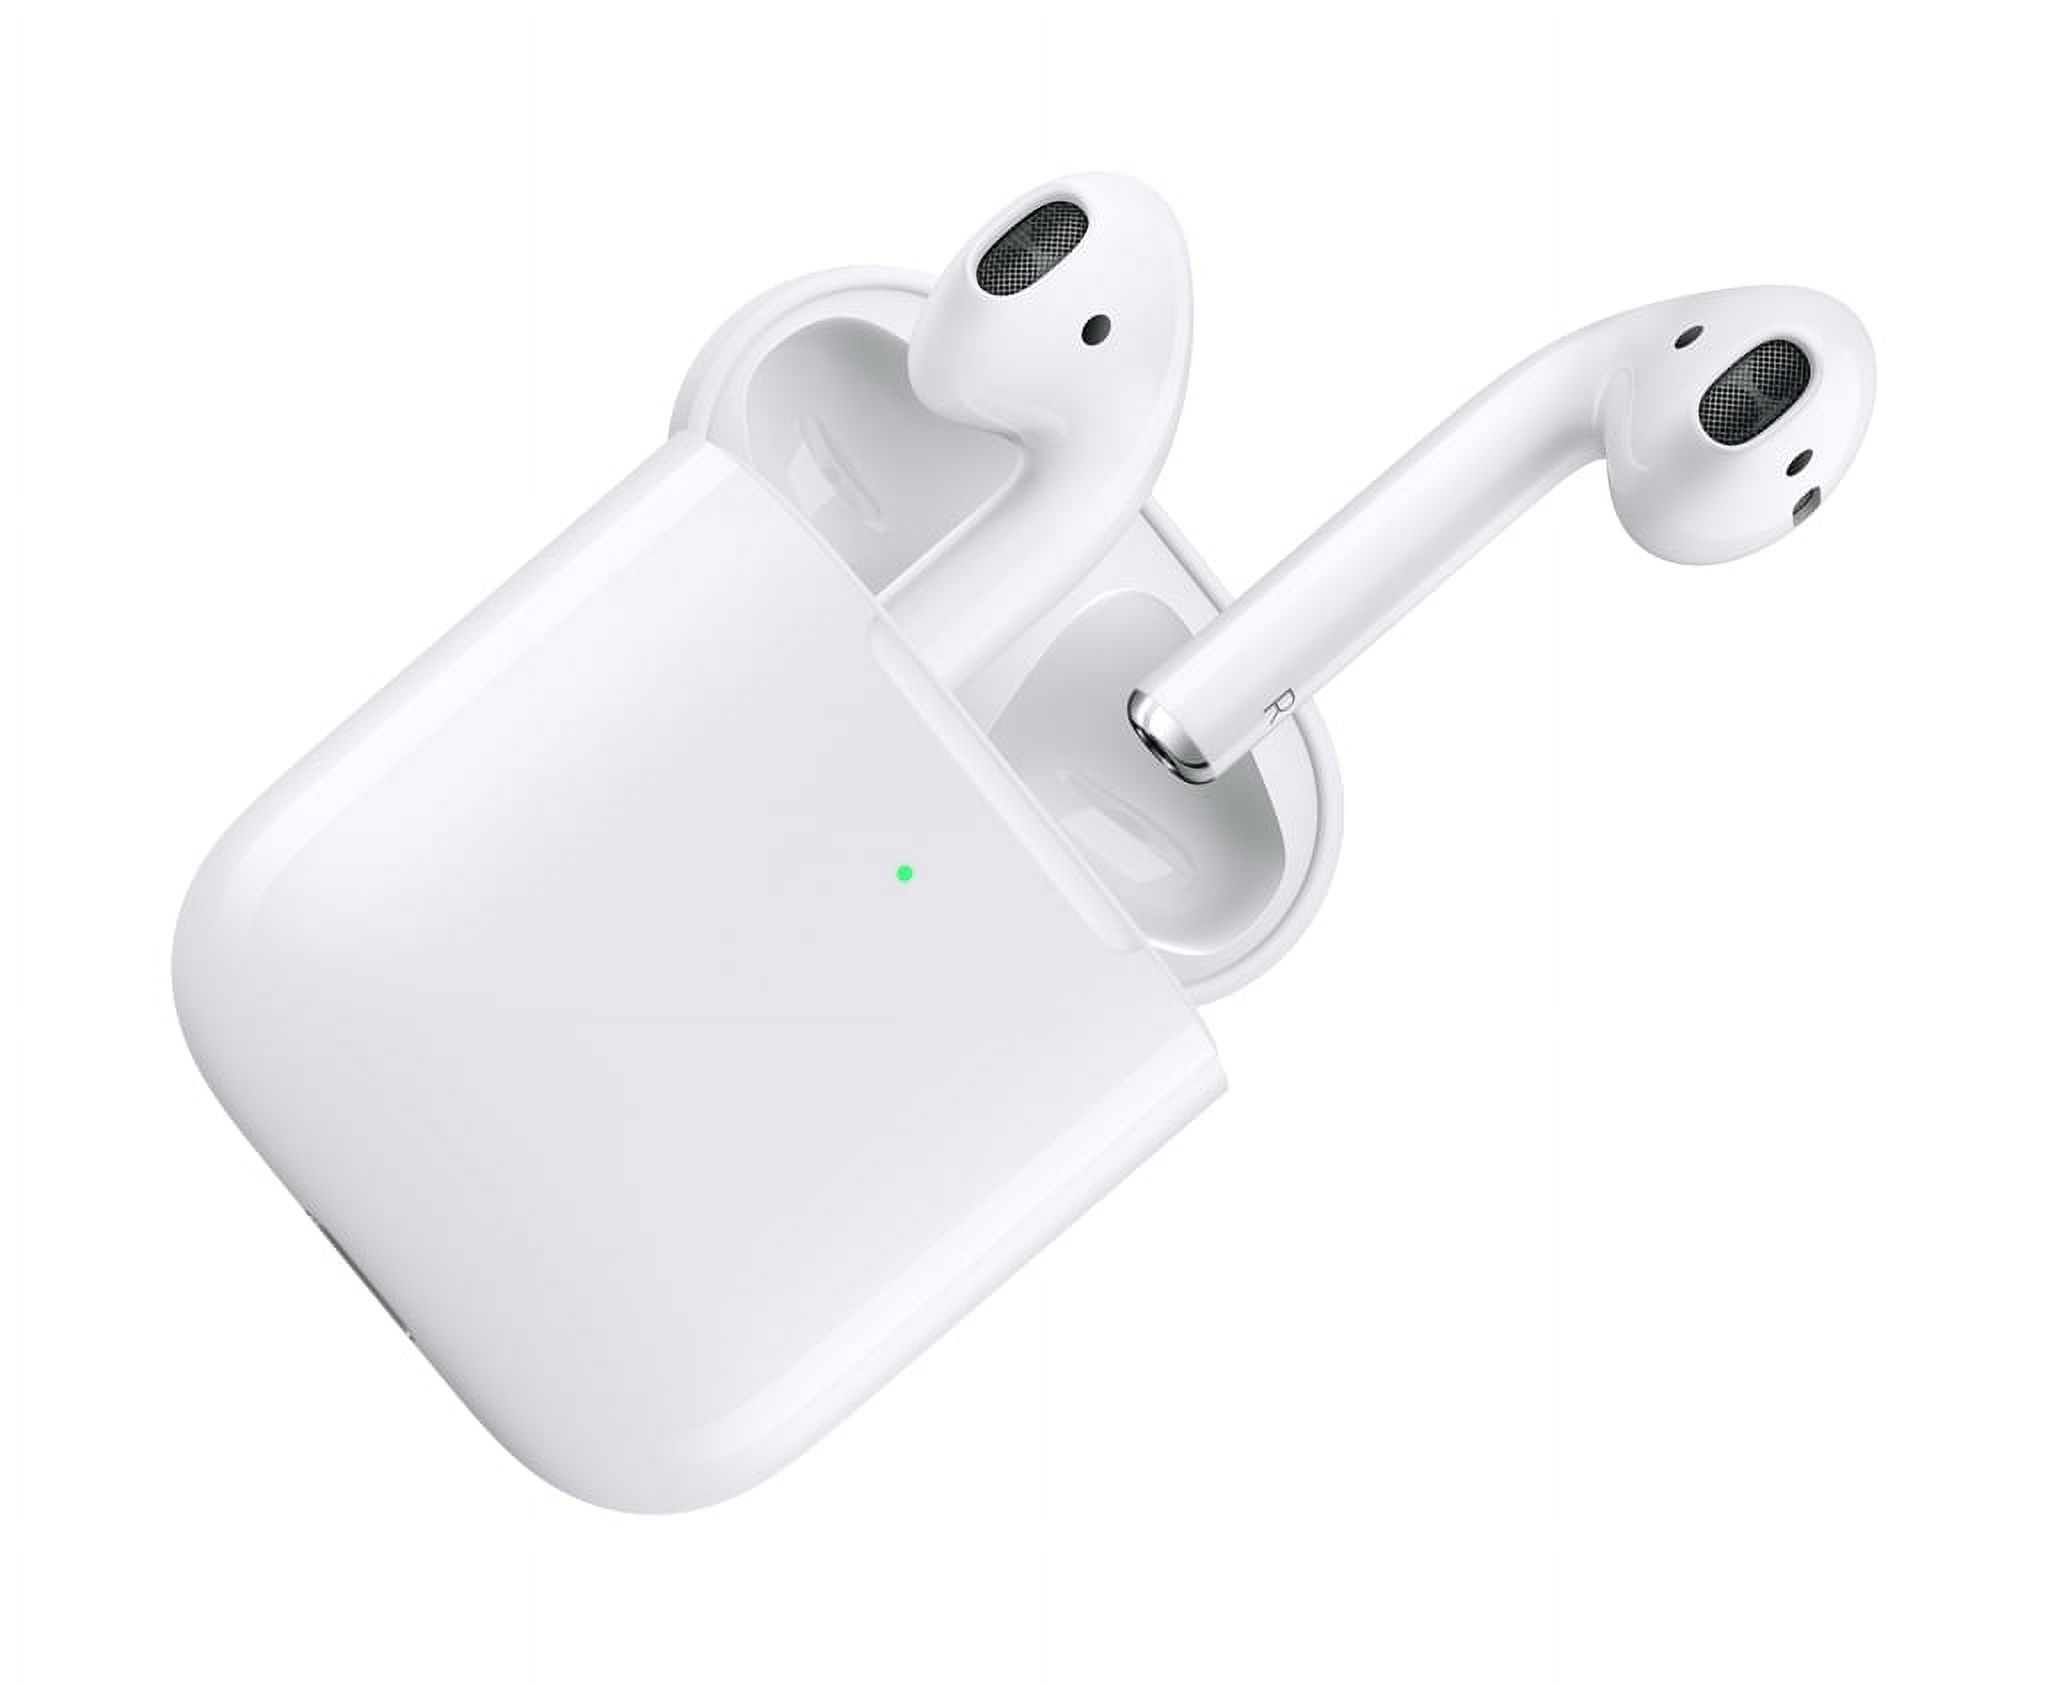 Used Apple AirPods Generation 2 with Wireless Charging Case MRXJ2AM/A (Used ) - image 1 of 8